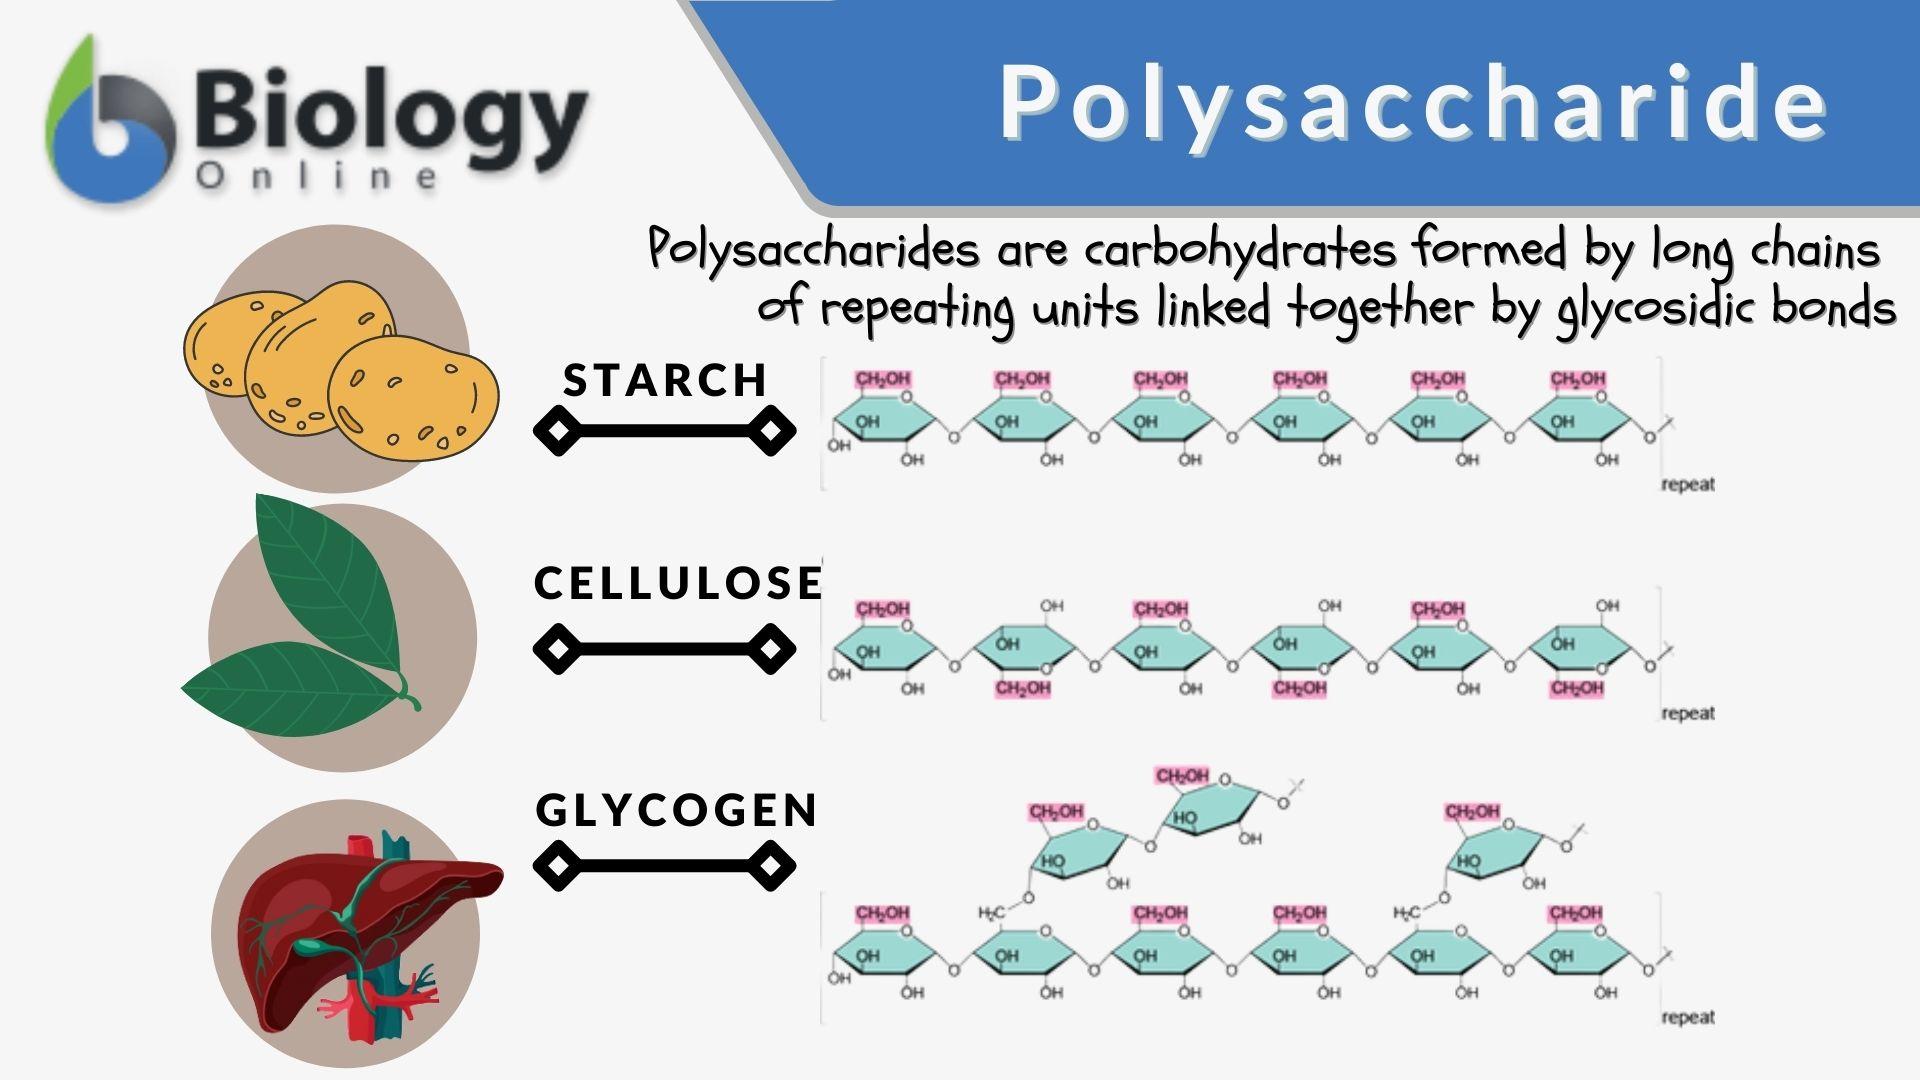 Polysaccharide Definition and Examples - Biology Online Dictionary